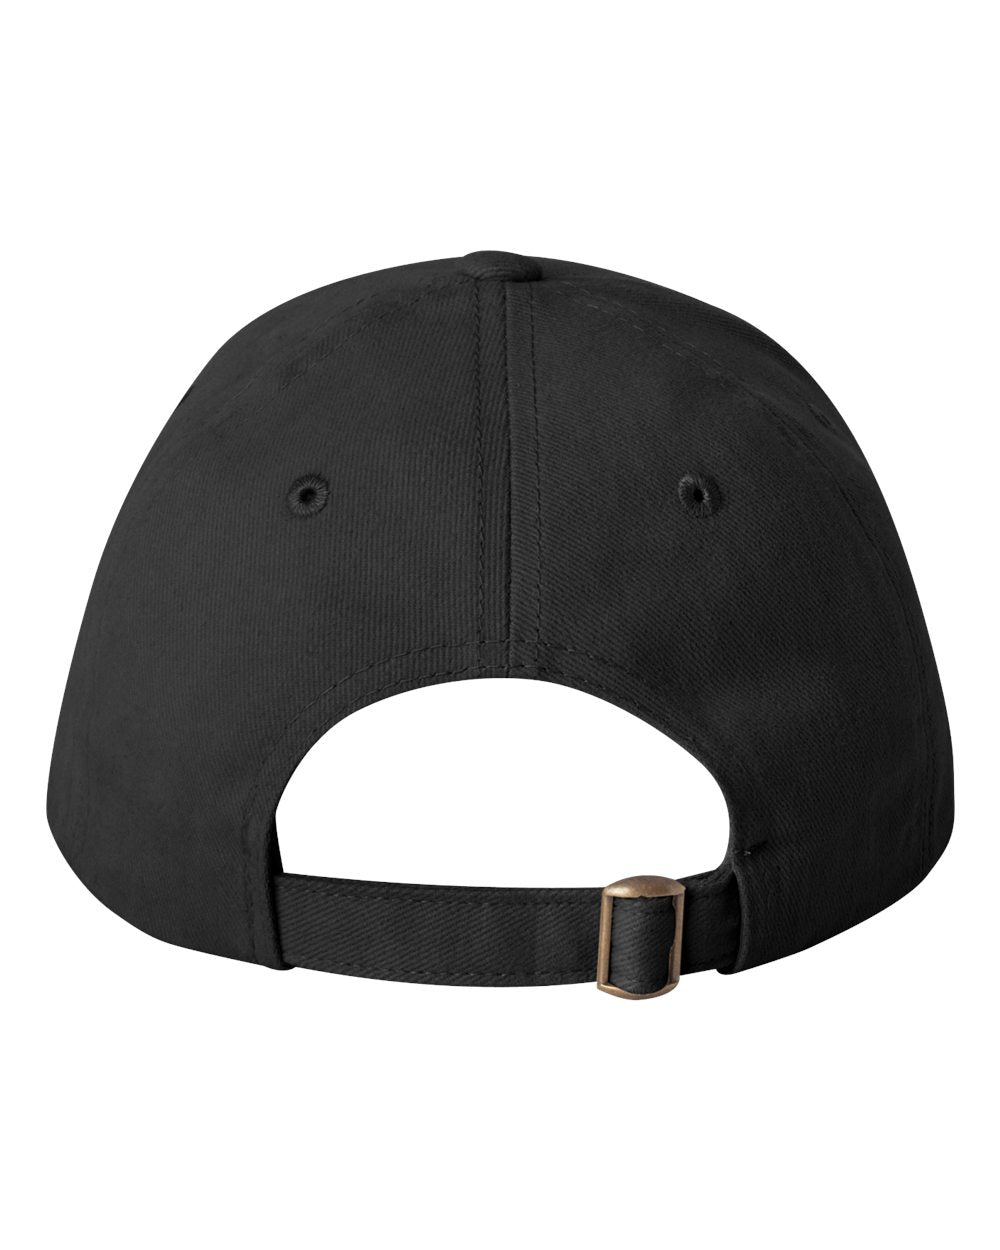 Sportsman Heavy Brushed Twill Structured Cap 9910 #color_Black